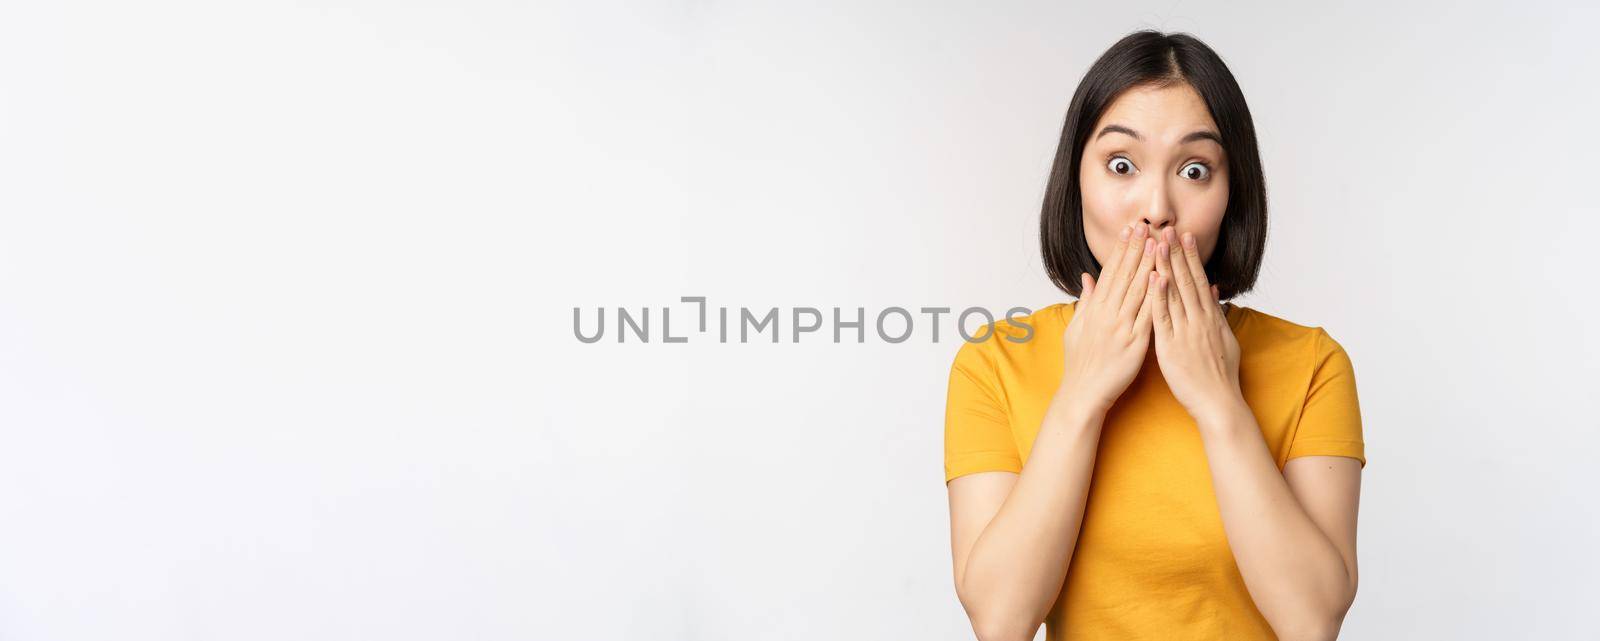 Surprised asian woman gasping, cover mouth with hands and looking amazed at camera, wearing yellow t-shirt, standing over white background.